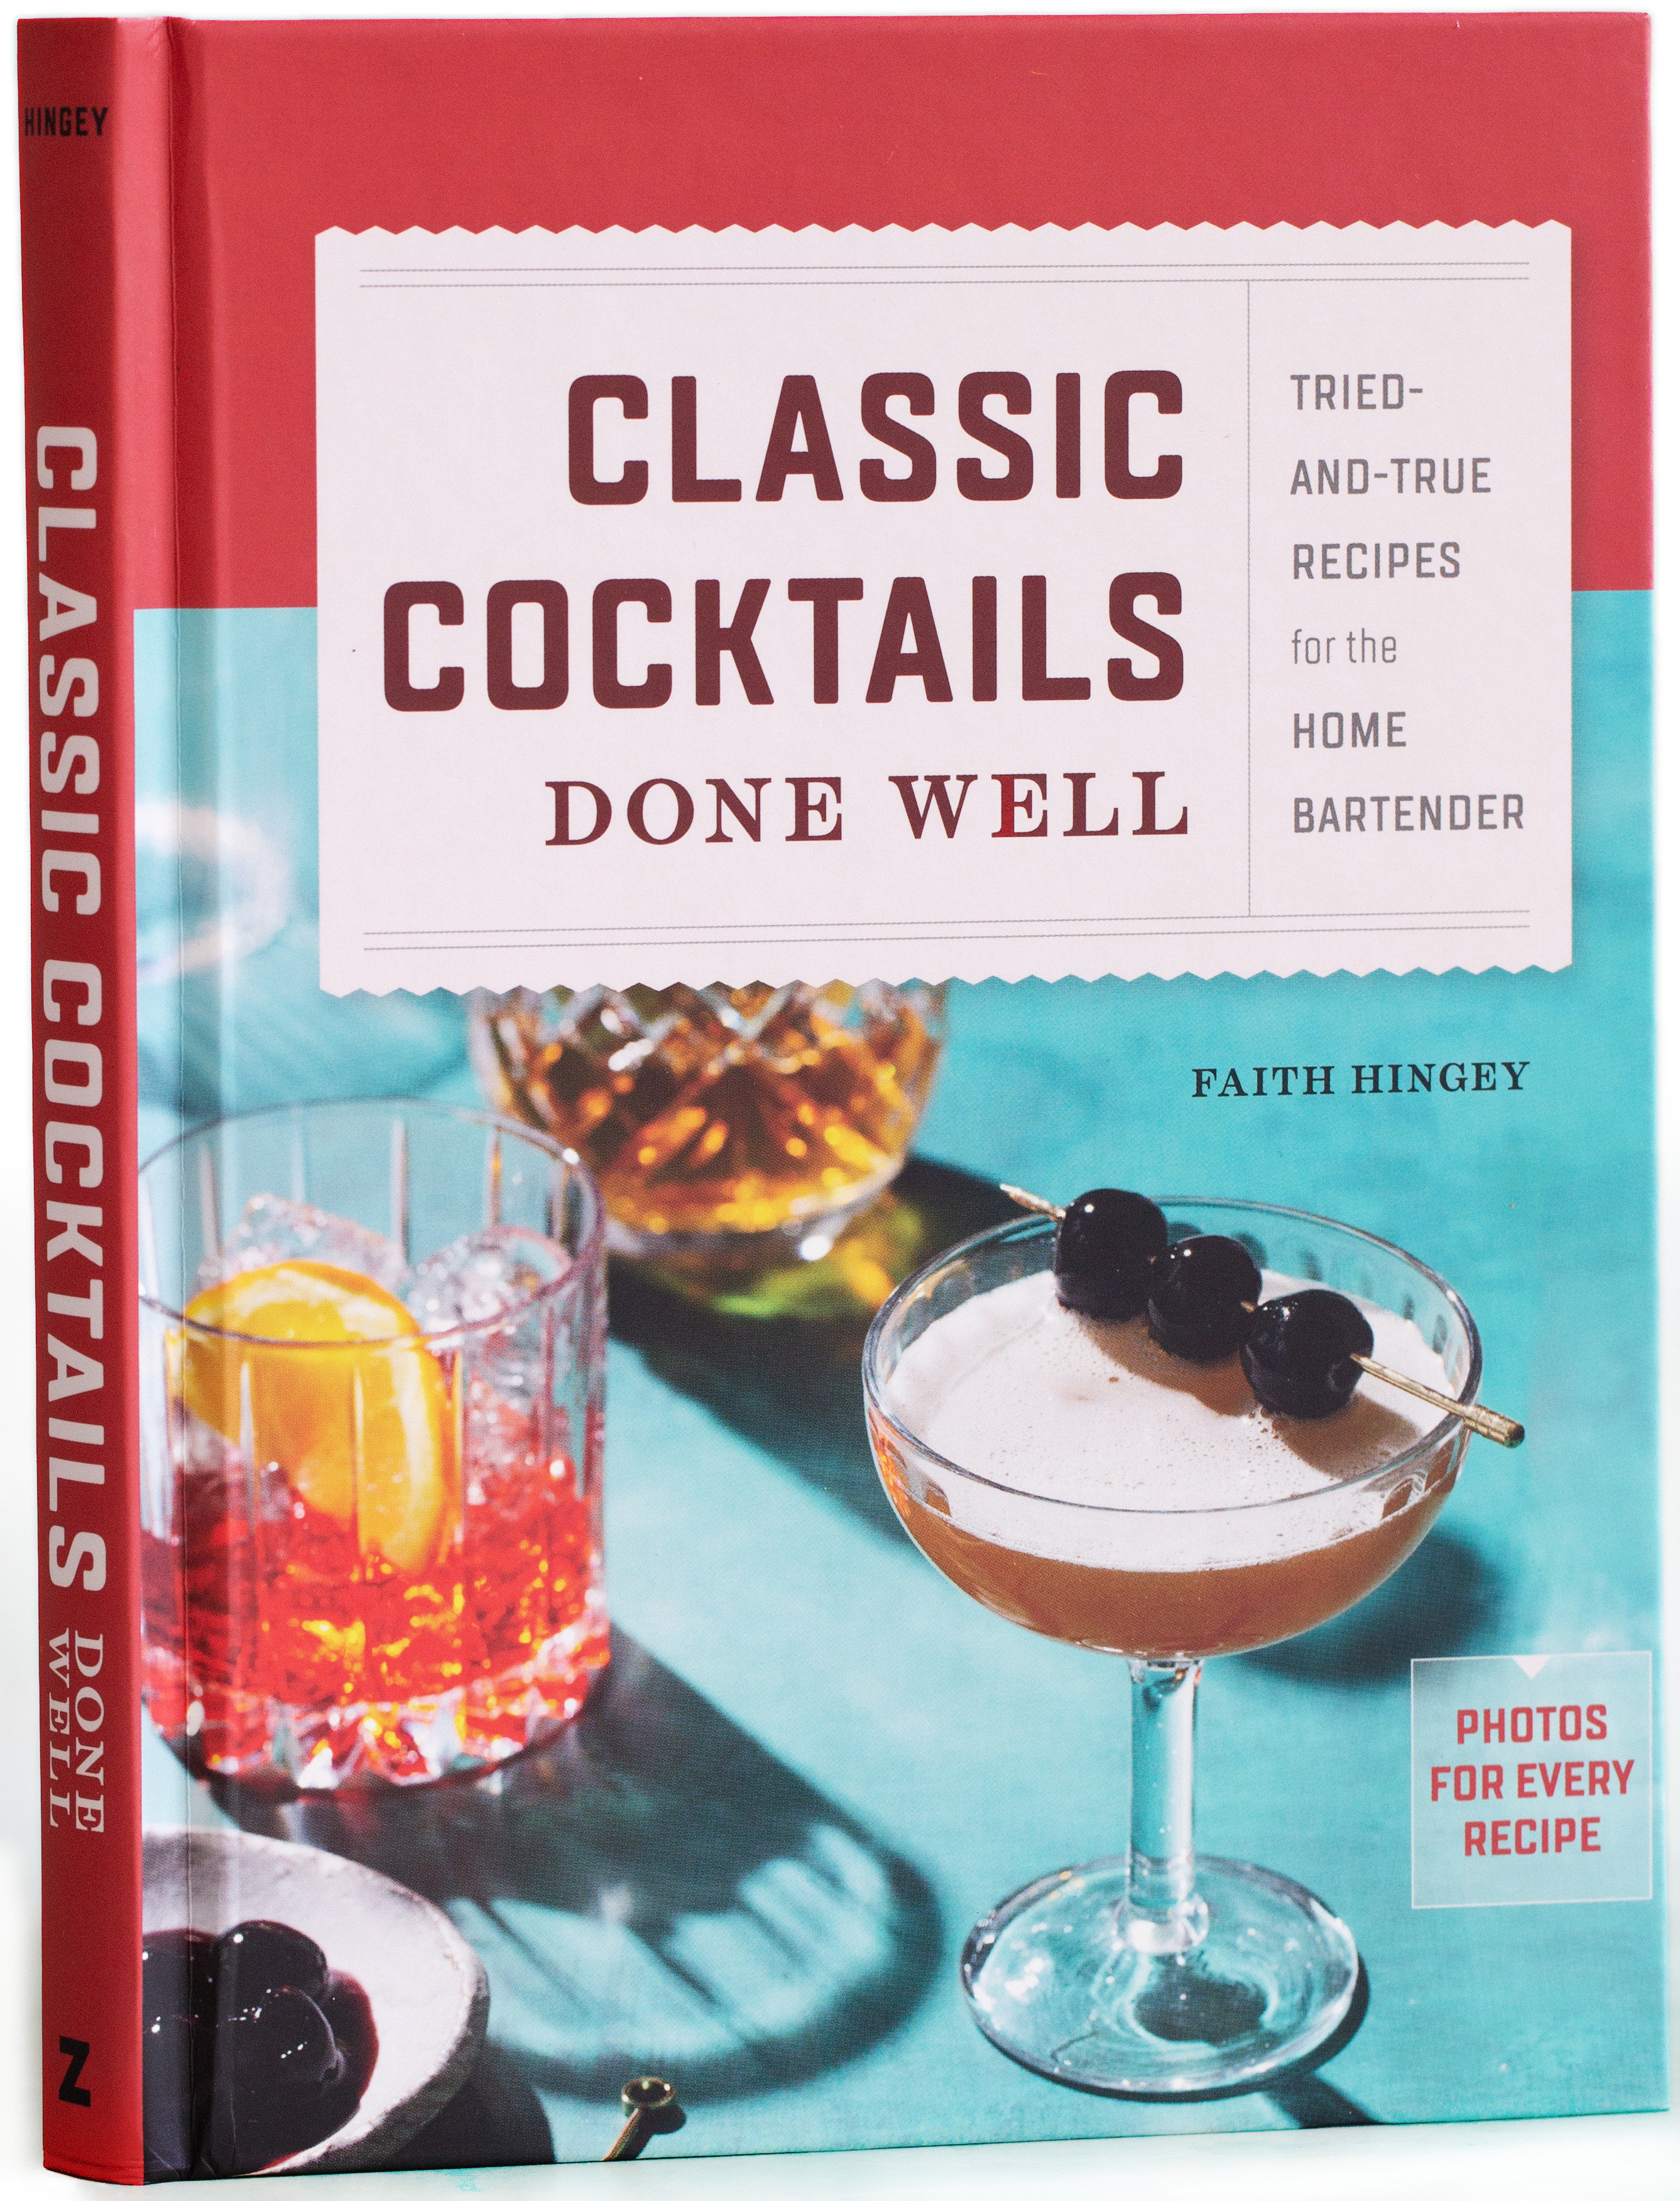 Classic Cocktails Done Well (Hardcover Book)